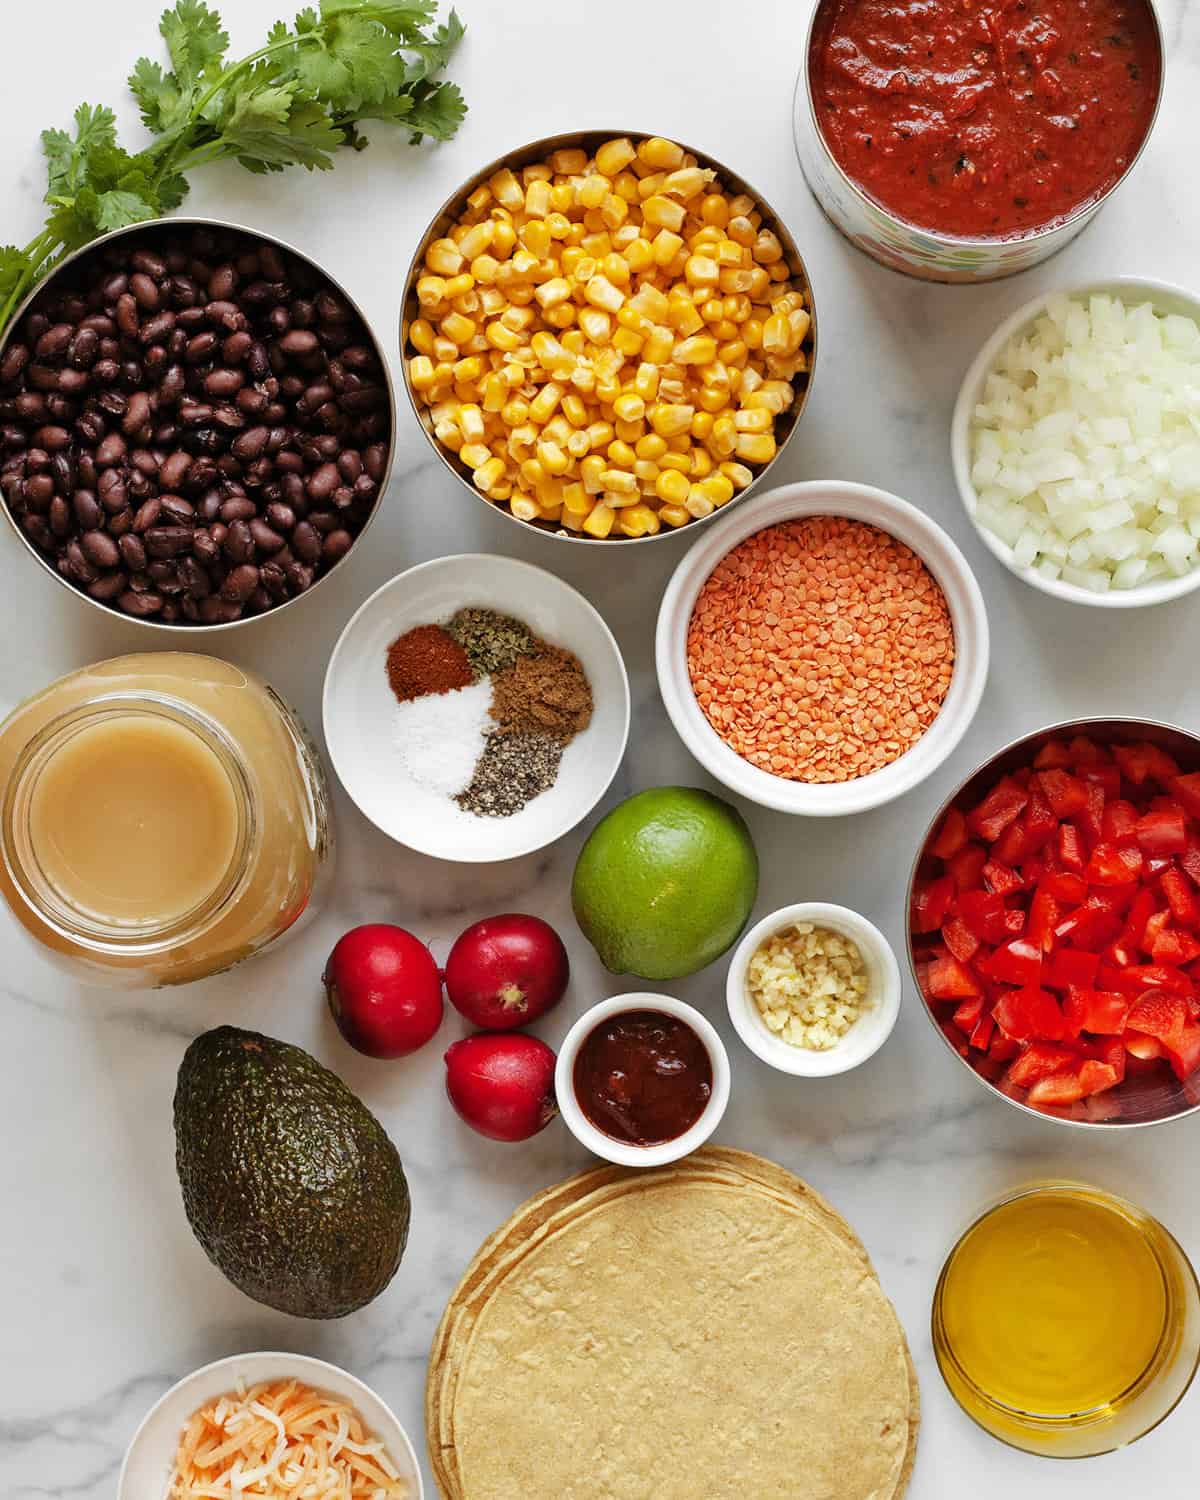 Ingredients including black beans, corn, tomatoes, red lentils, vegetable broth, onions, spices, garlic, adobo sauce and corn tortillas.